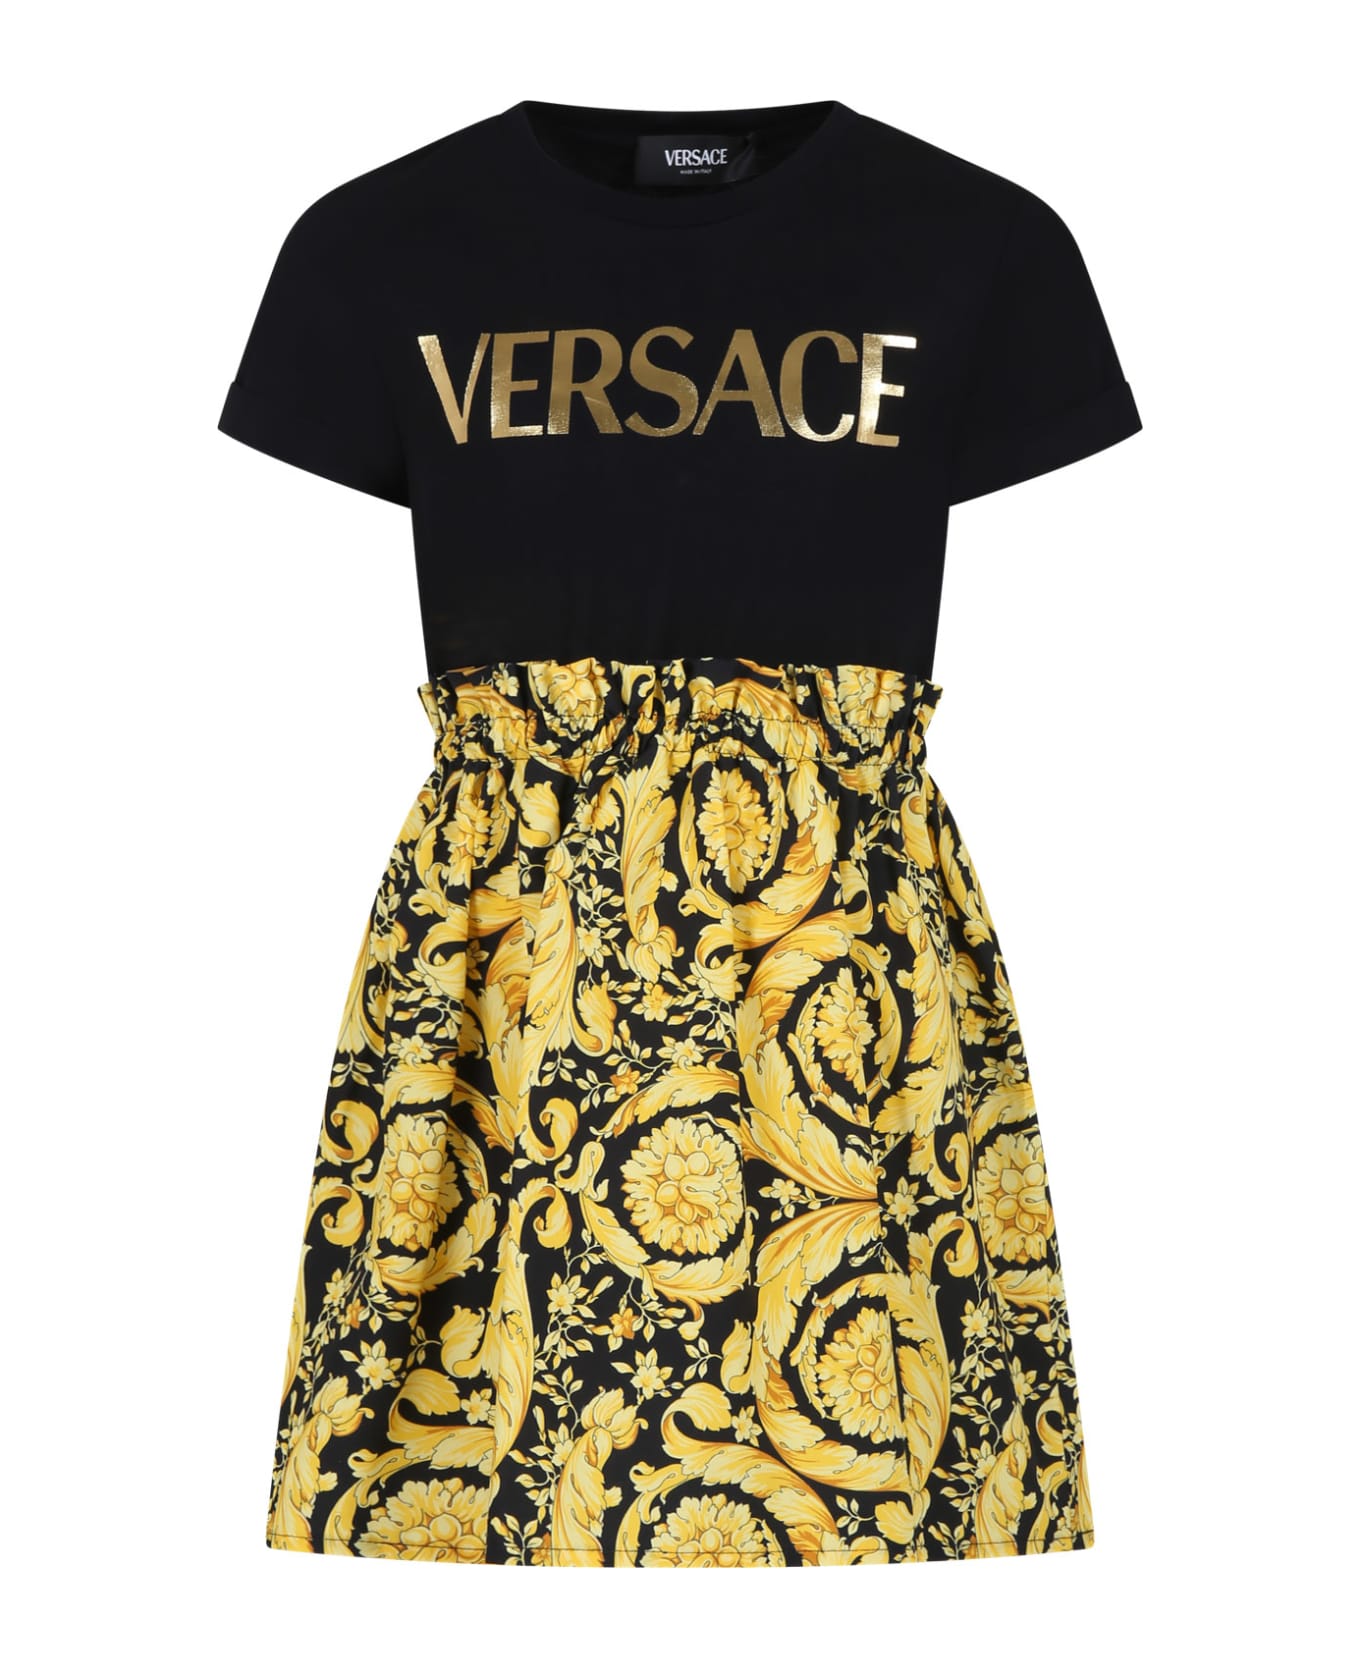 Versace Black Dress For Girl With Versace Logo And Baroque Print - Black ワンピース＆ドレス